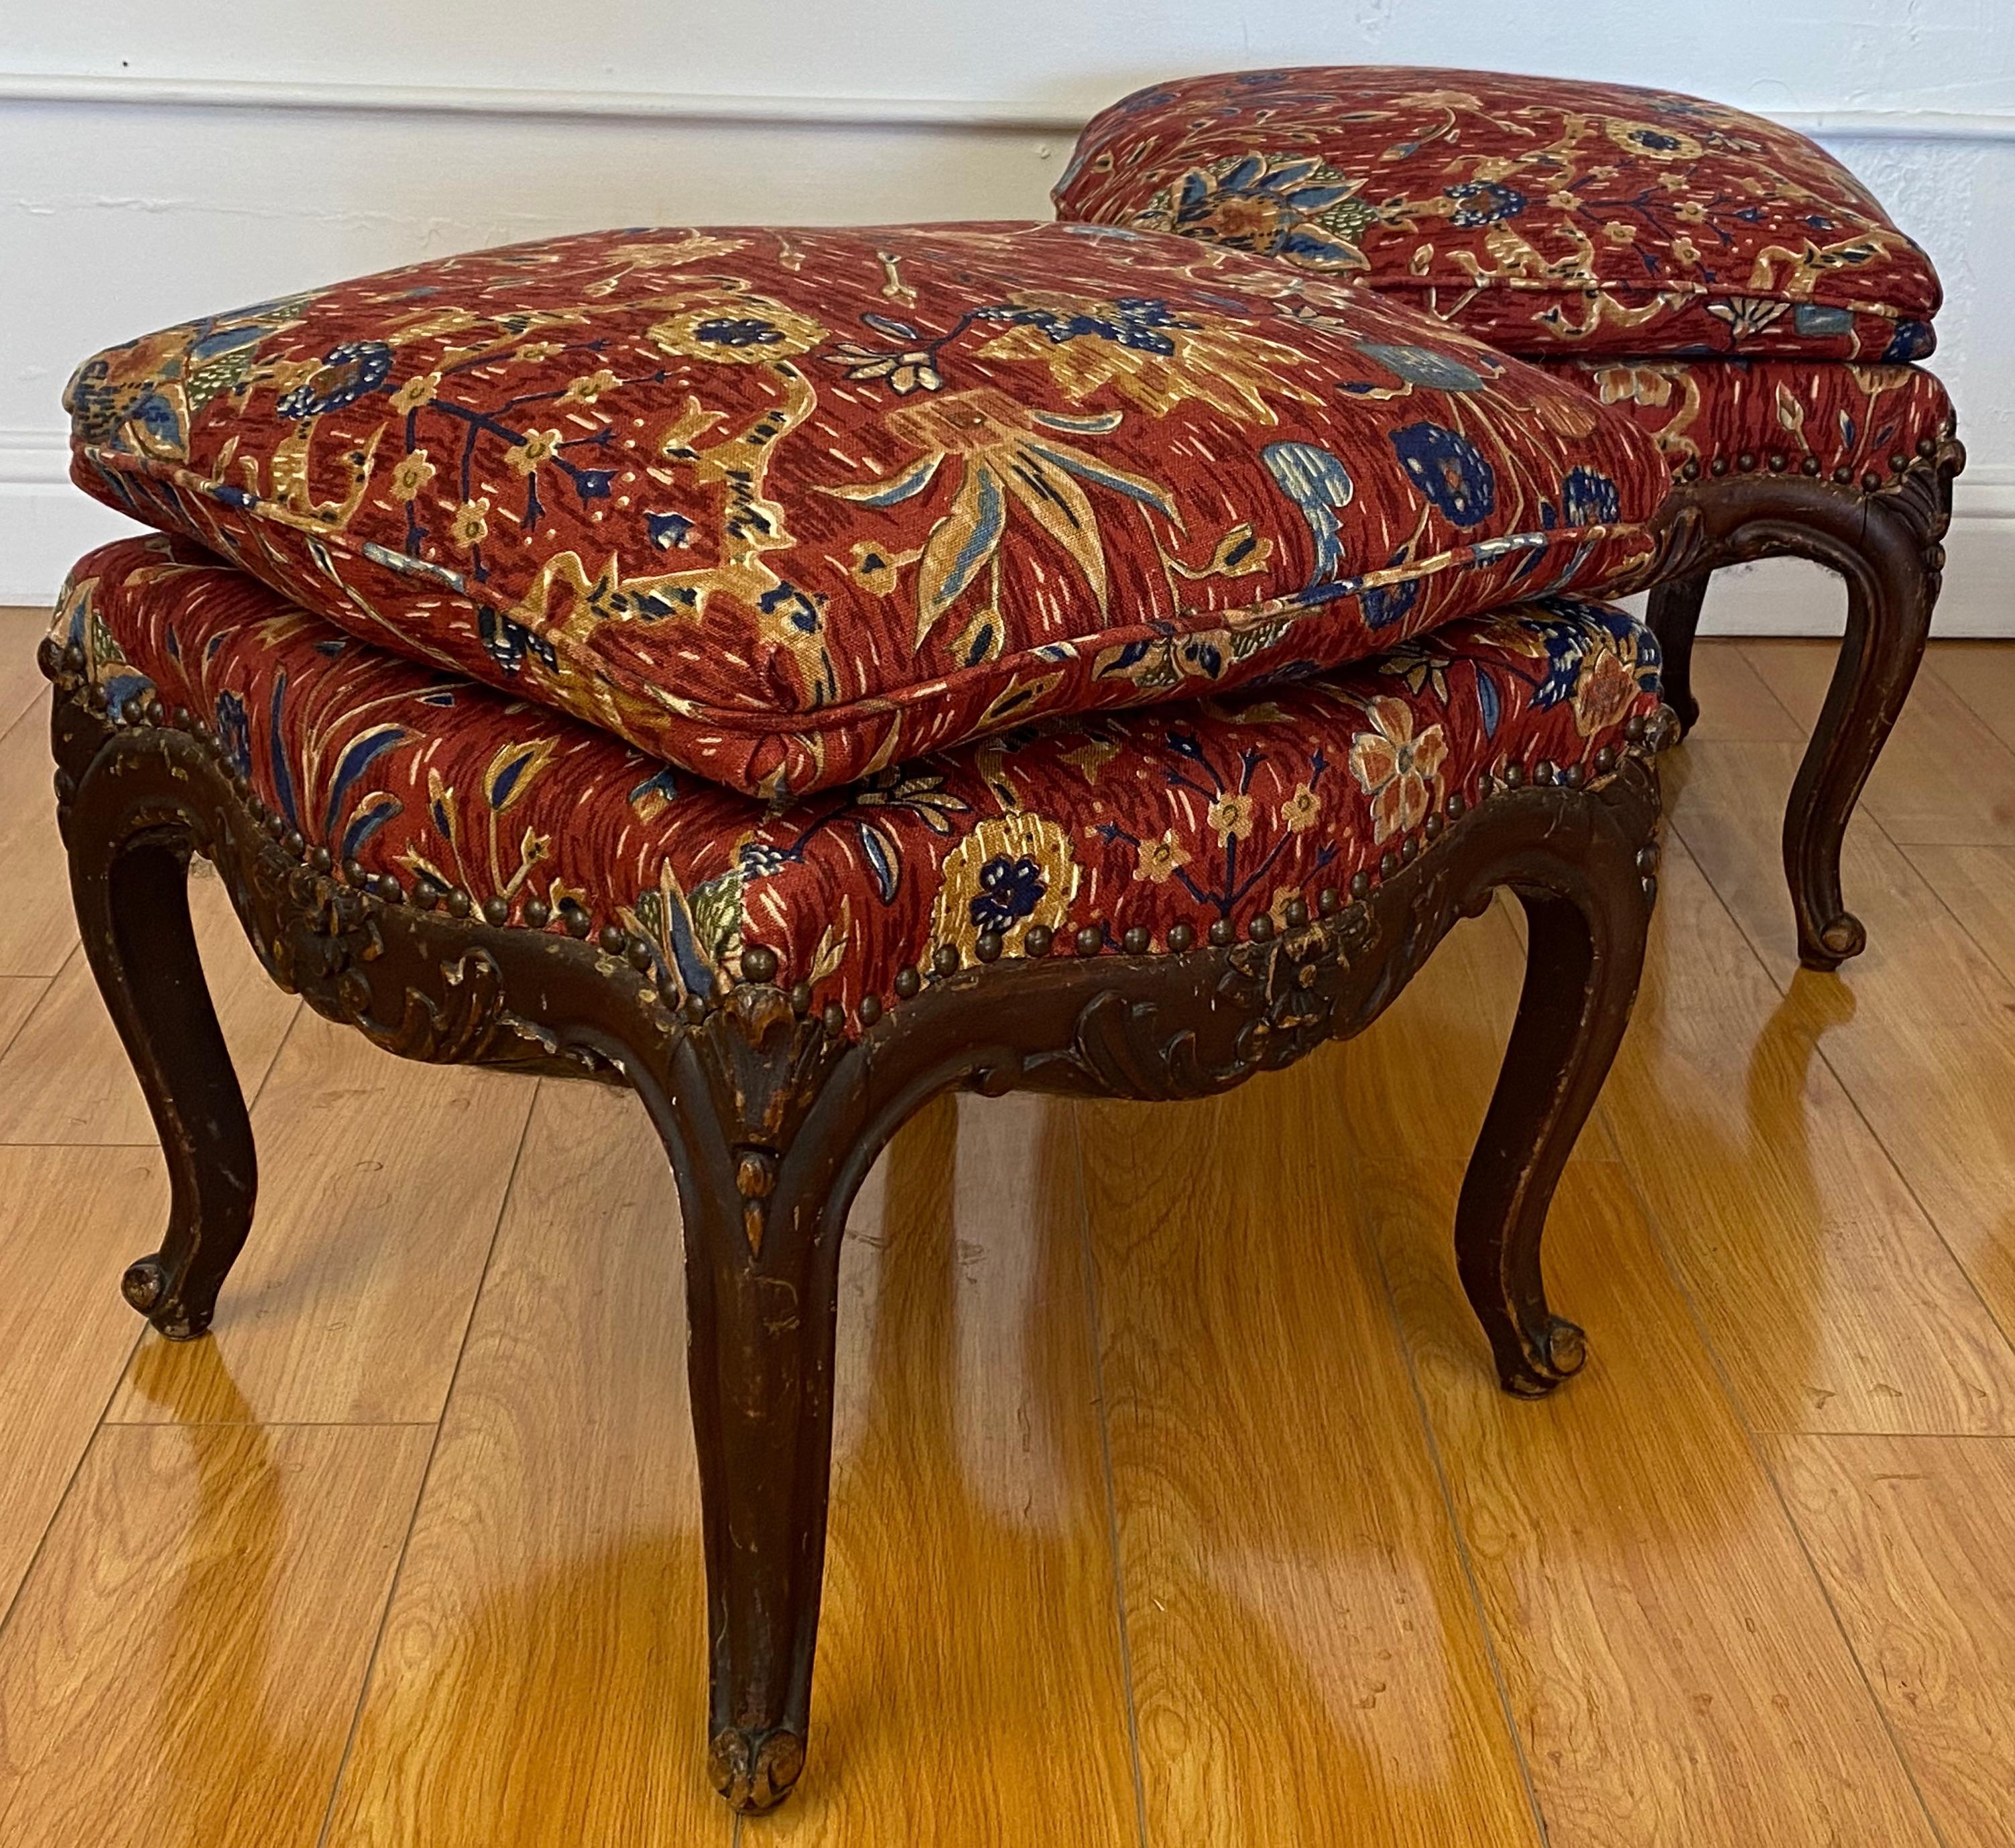 Pair of antique carved mahogany framed benches

The frames are late 19th-early 20th century

The fabric is late 20th century

Each seat measures 19